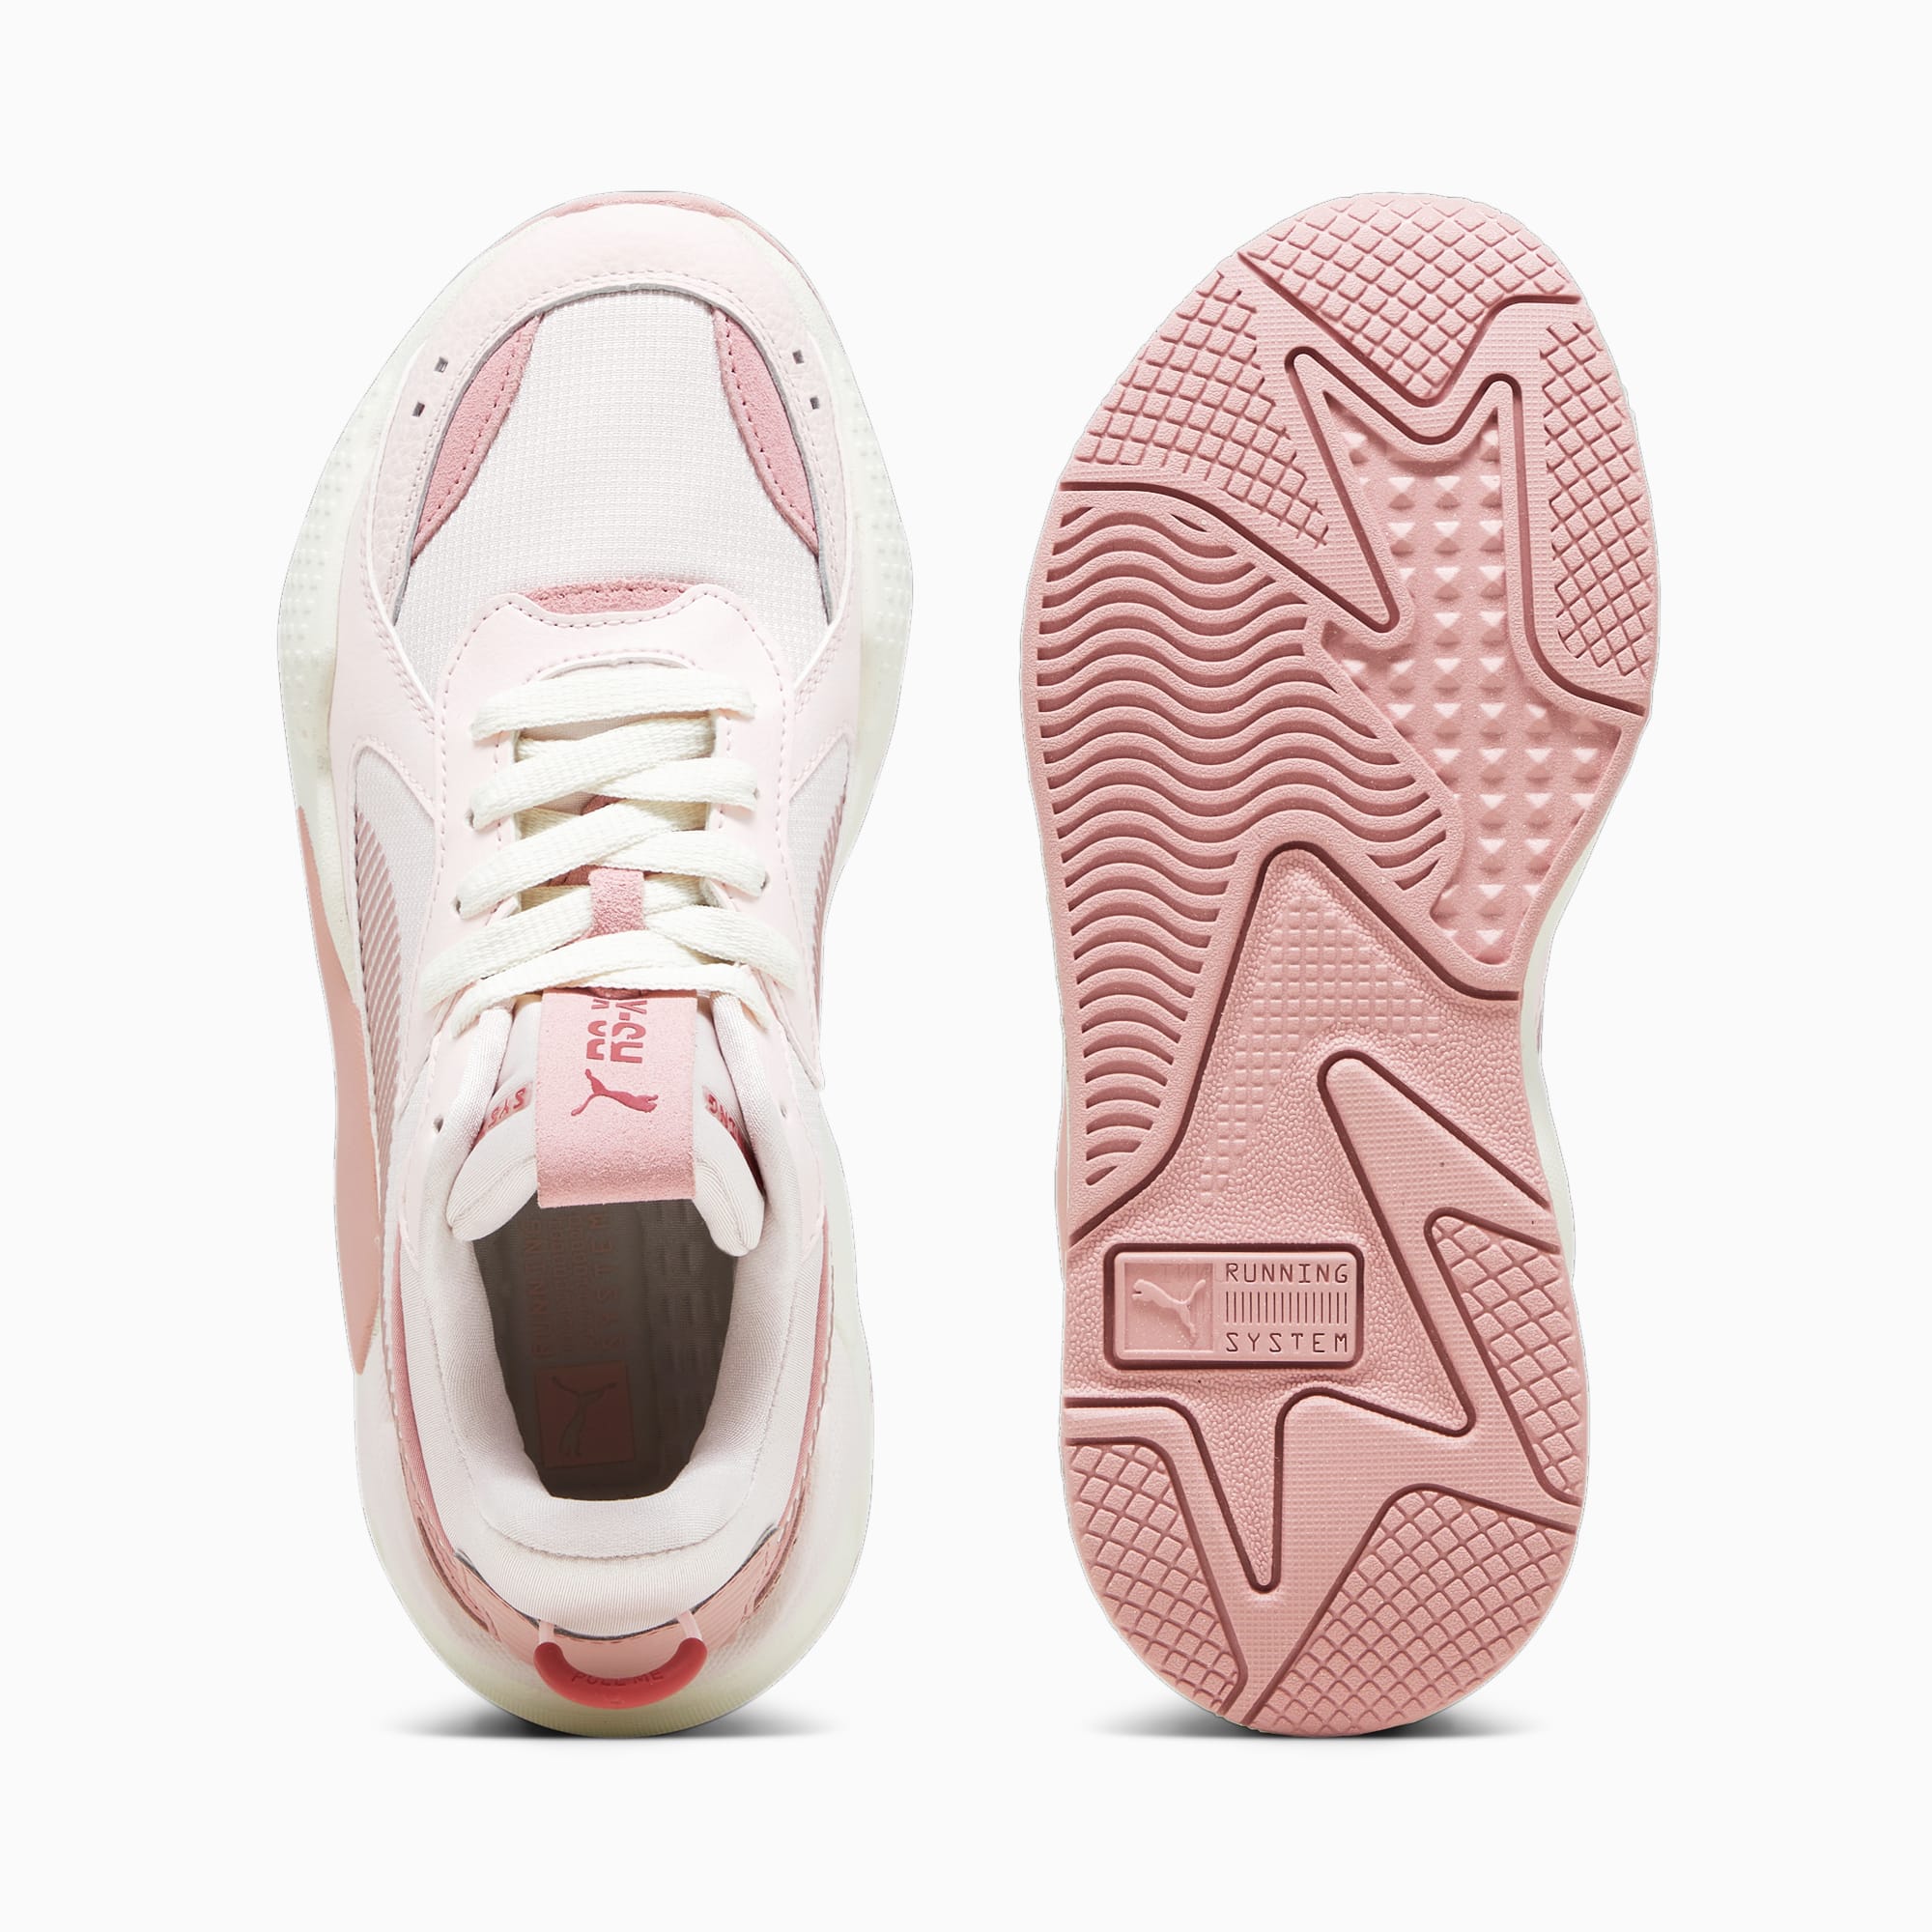 Tenis Puma RS-X Reinvention Mujer 369579 17 Casual Blanco/Rosa/Gris